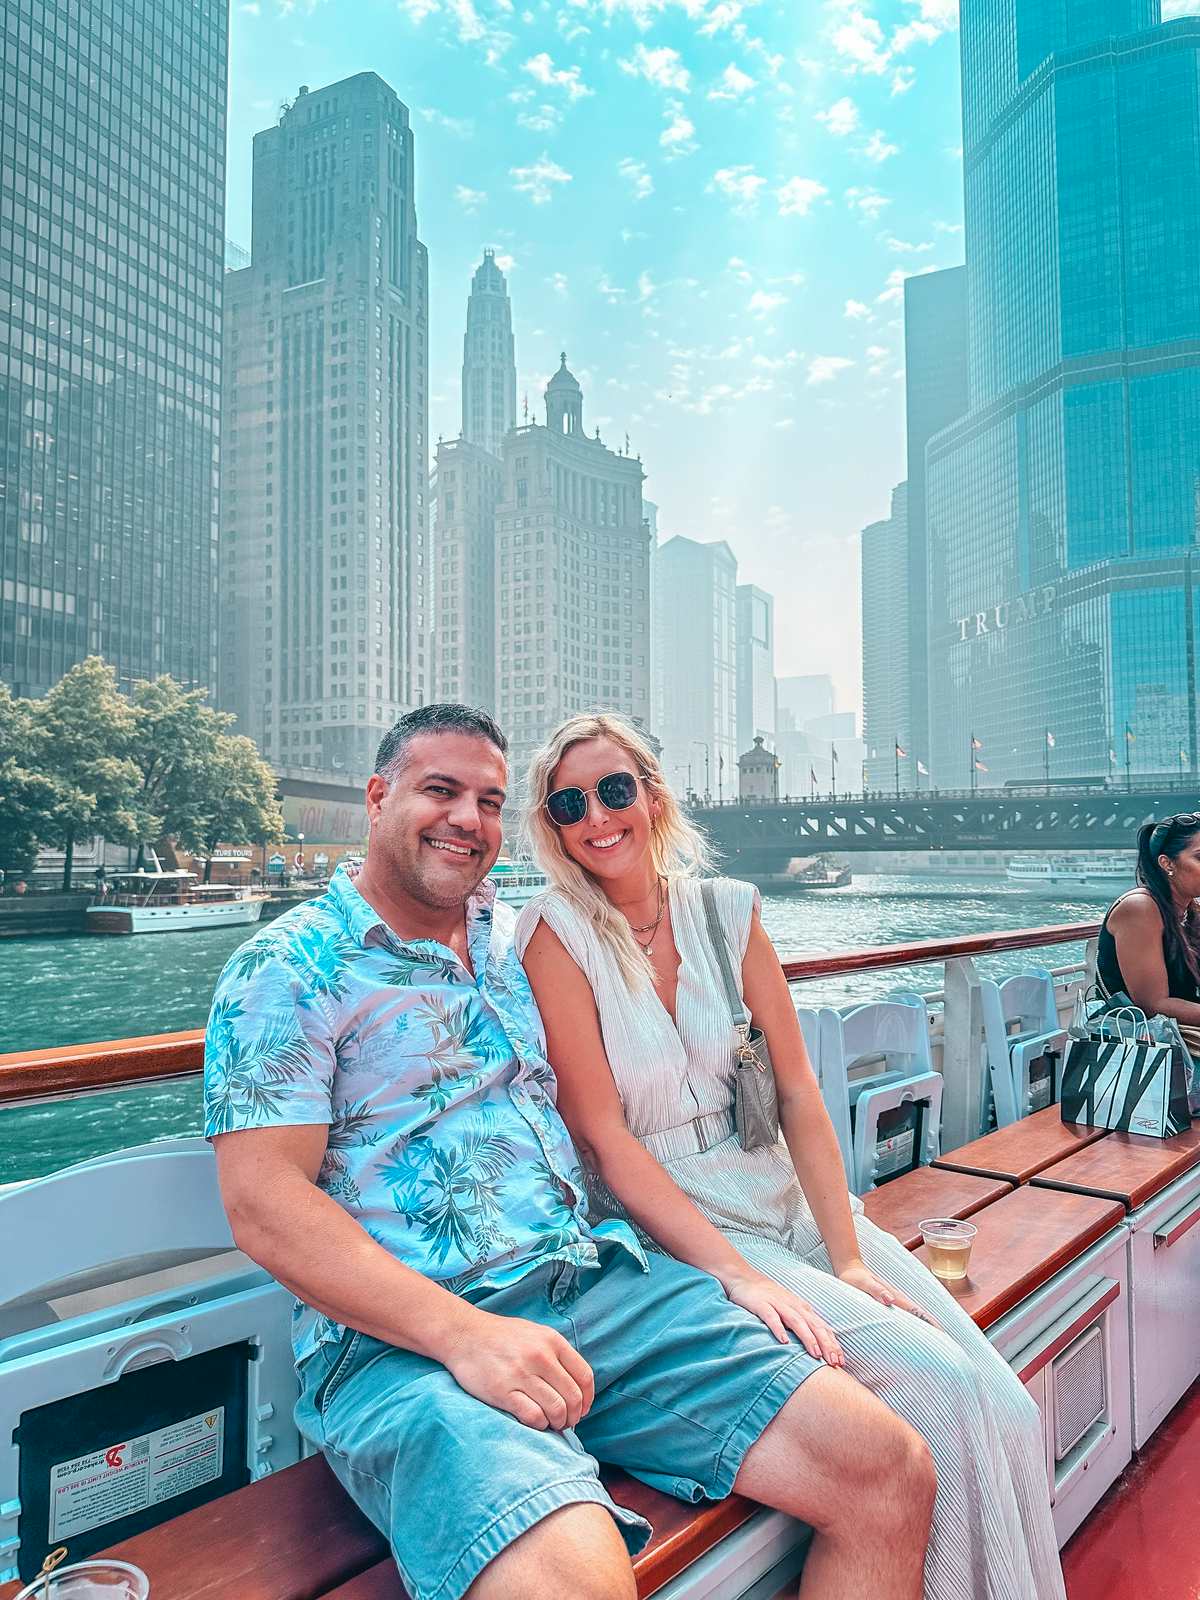 Couple enjoying the Shoreline Sightseeing Architecture River Tour in Chicago